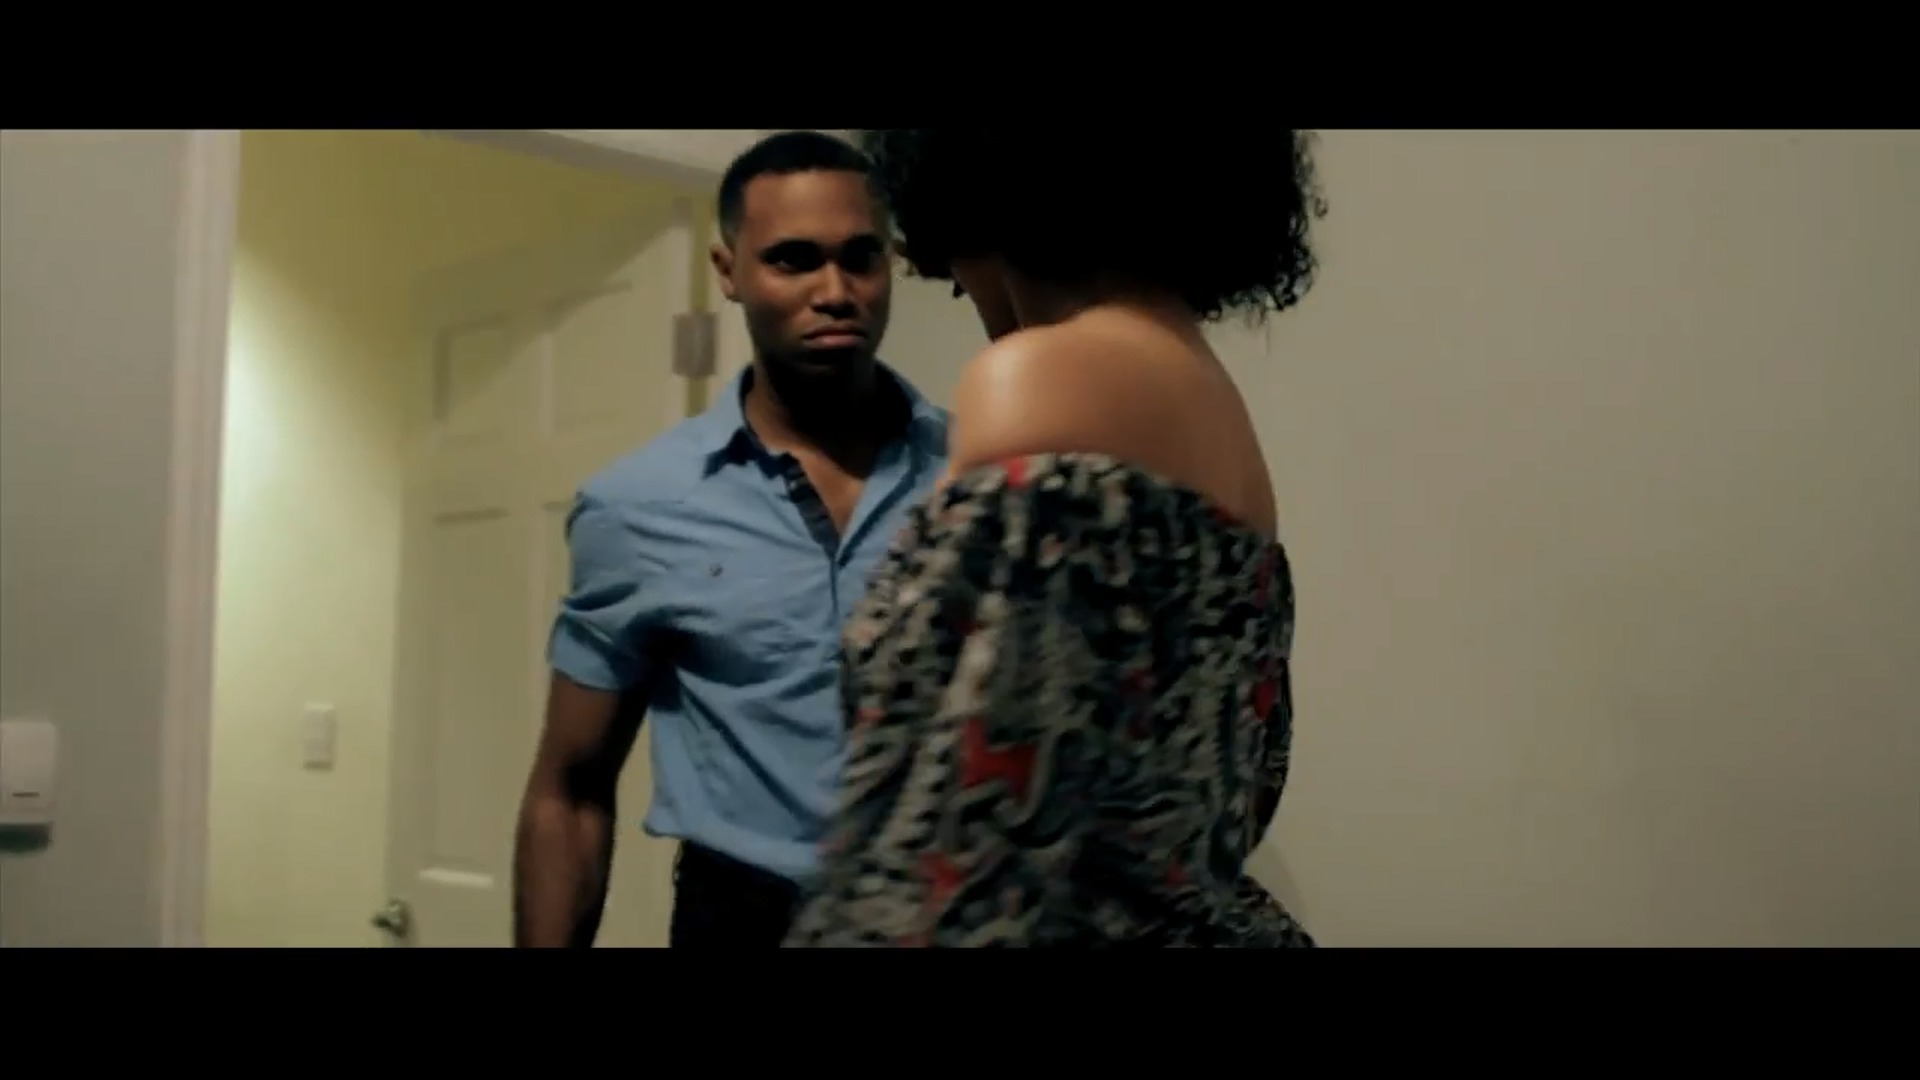 Scene from the film 'Sweetheart', for The Bahamas Red Cross and USAID for their 'Protect Ya Self' campaign.